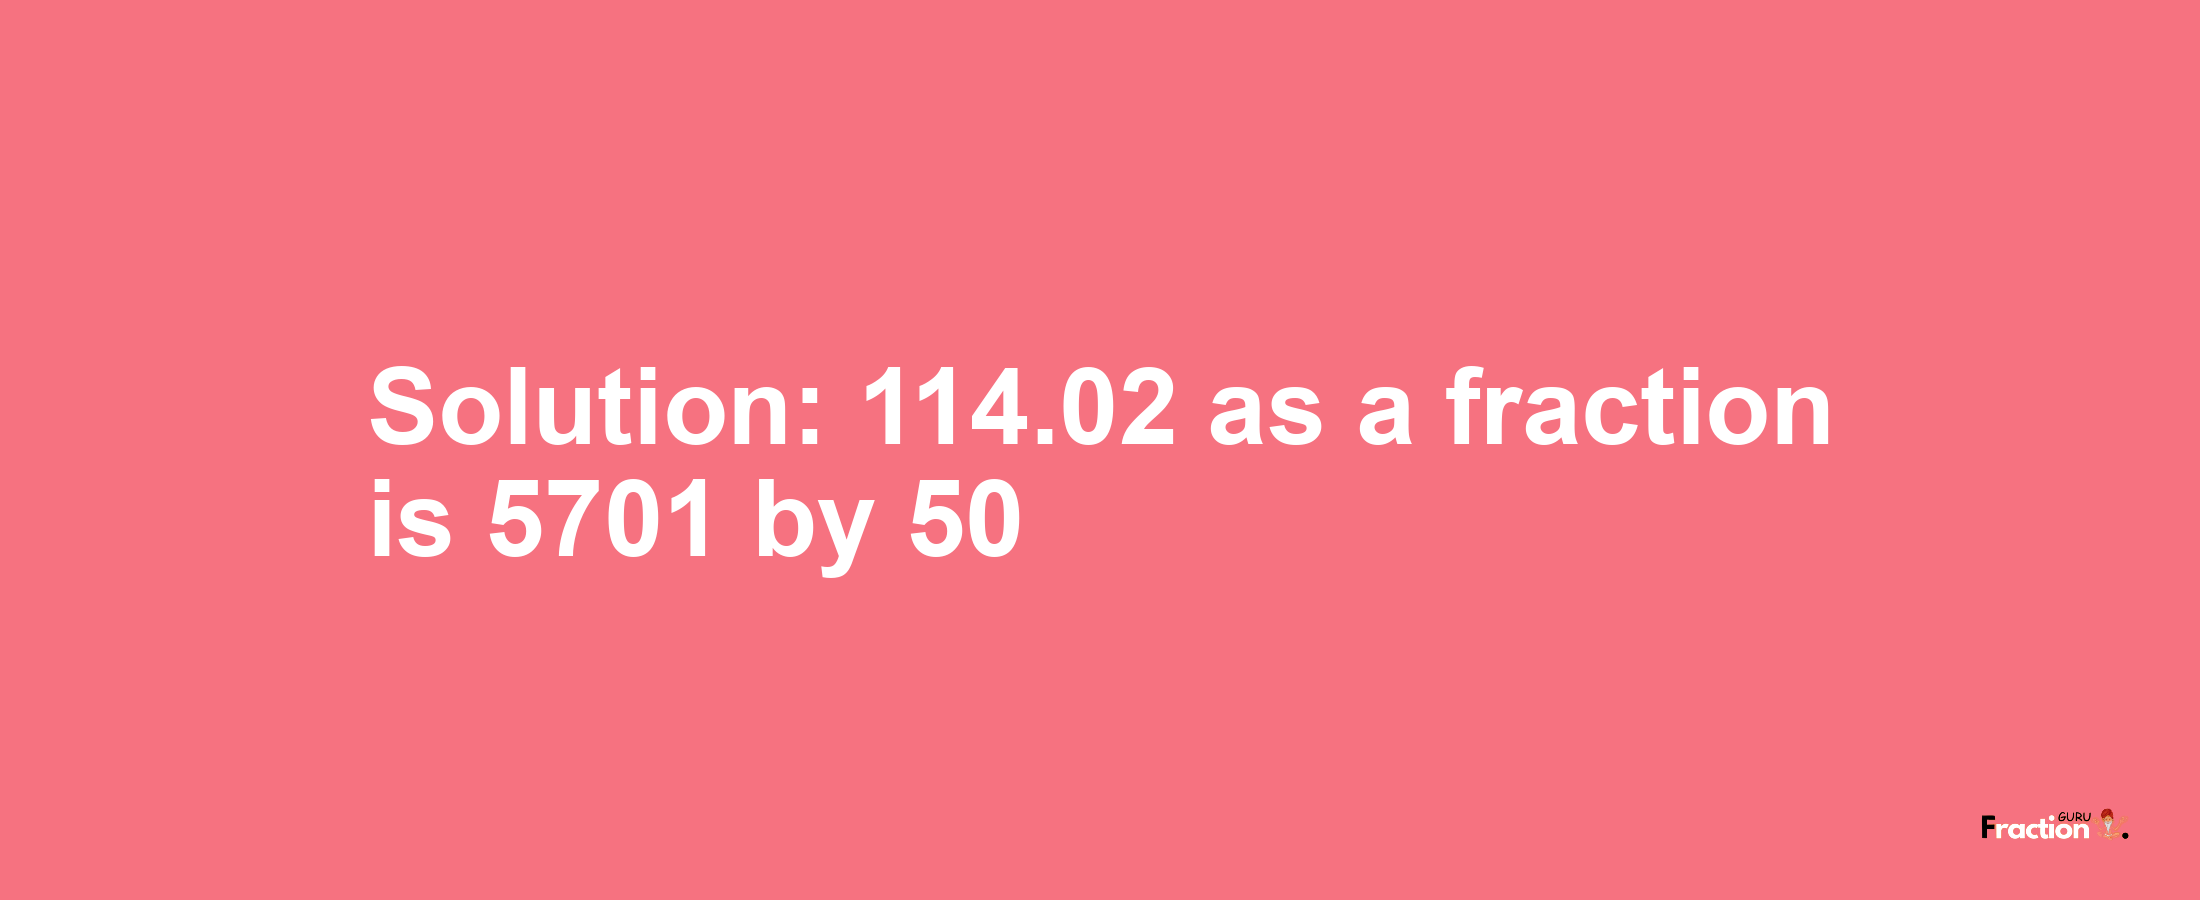 Solution:114.02 as a fraction is 5701/50